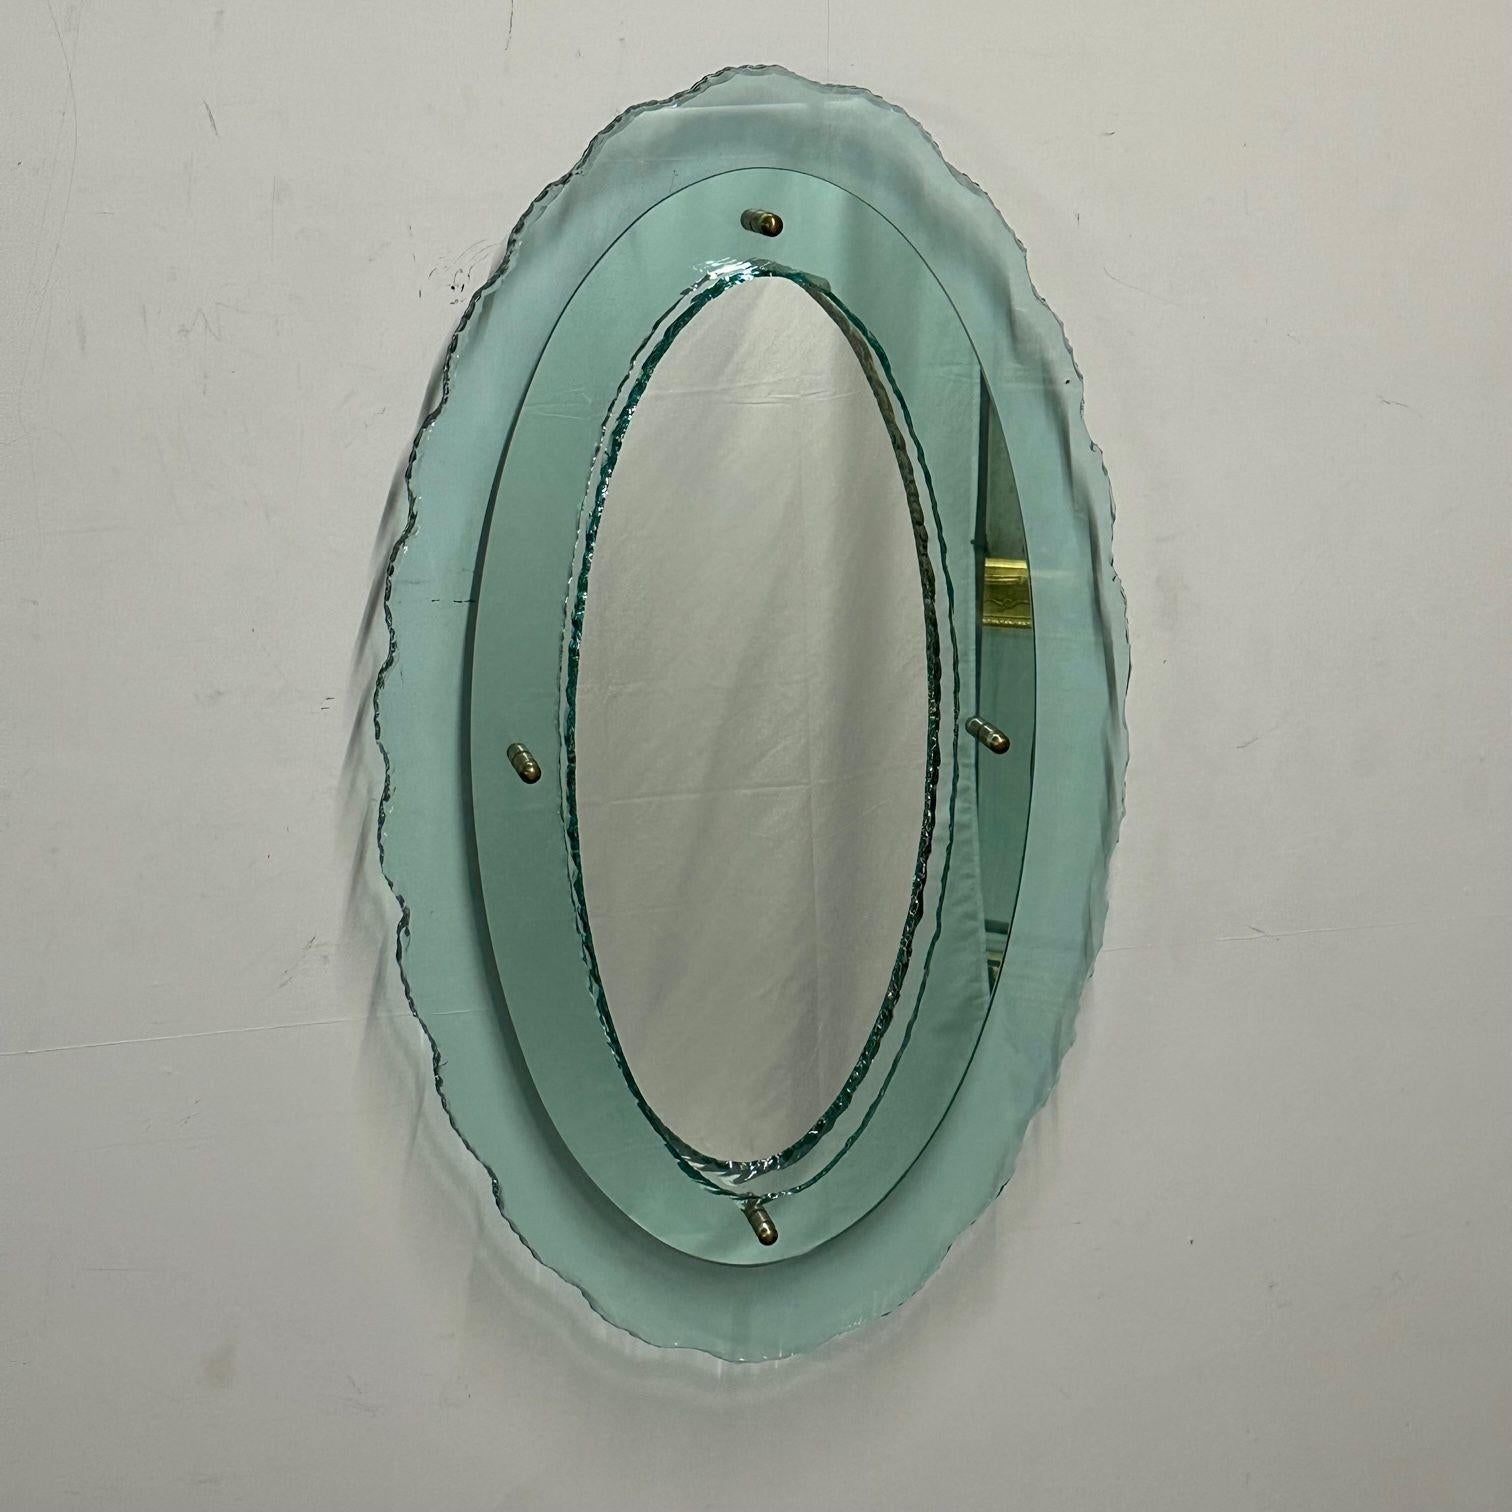 Italian Mid-Century Modern Fontana Arte Oval Glass Wall Mirror or Mirrored Plateau Tray
A stunning rare and important wall mirror or mirrored plateau tray. This duel Fontana Arte work of art is quite possibly the finest most versatile piece from